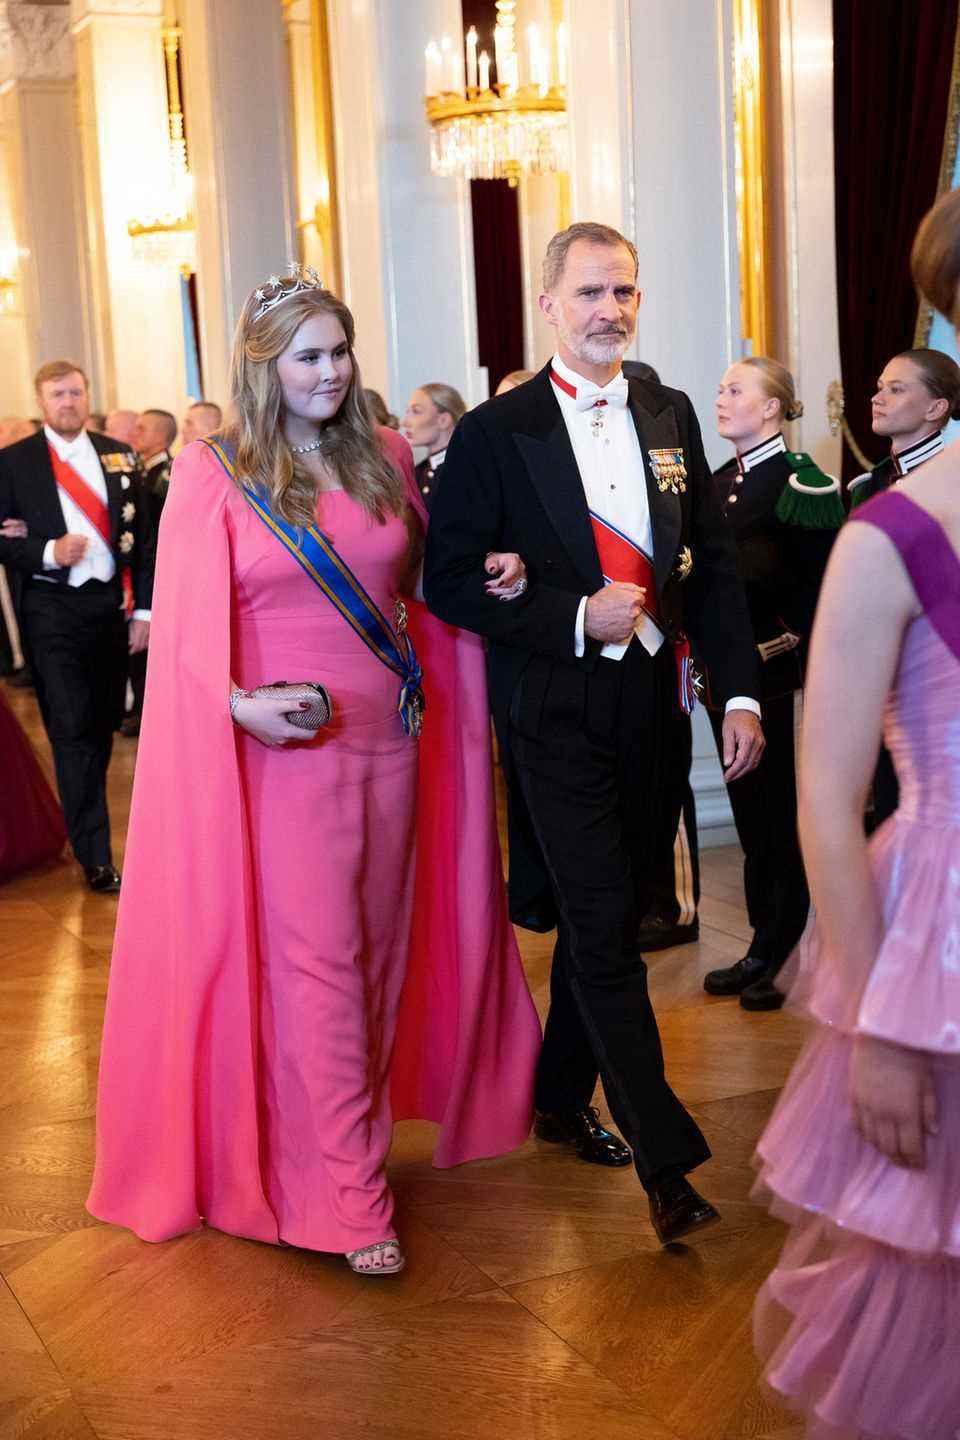 Princess Amalia and King Felipe at the gala dinner honoring Princess Ingrid Alexandra on the occasion of her 18th birthday at the Royal Palace in Oslo.